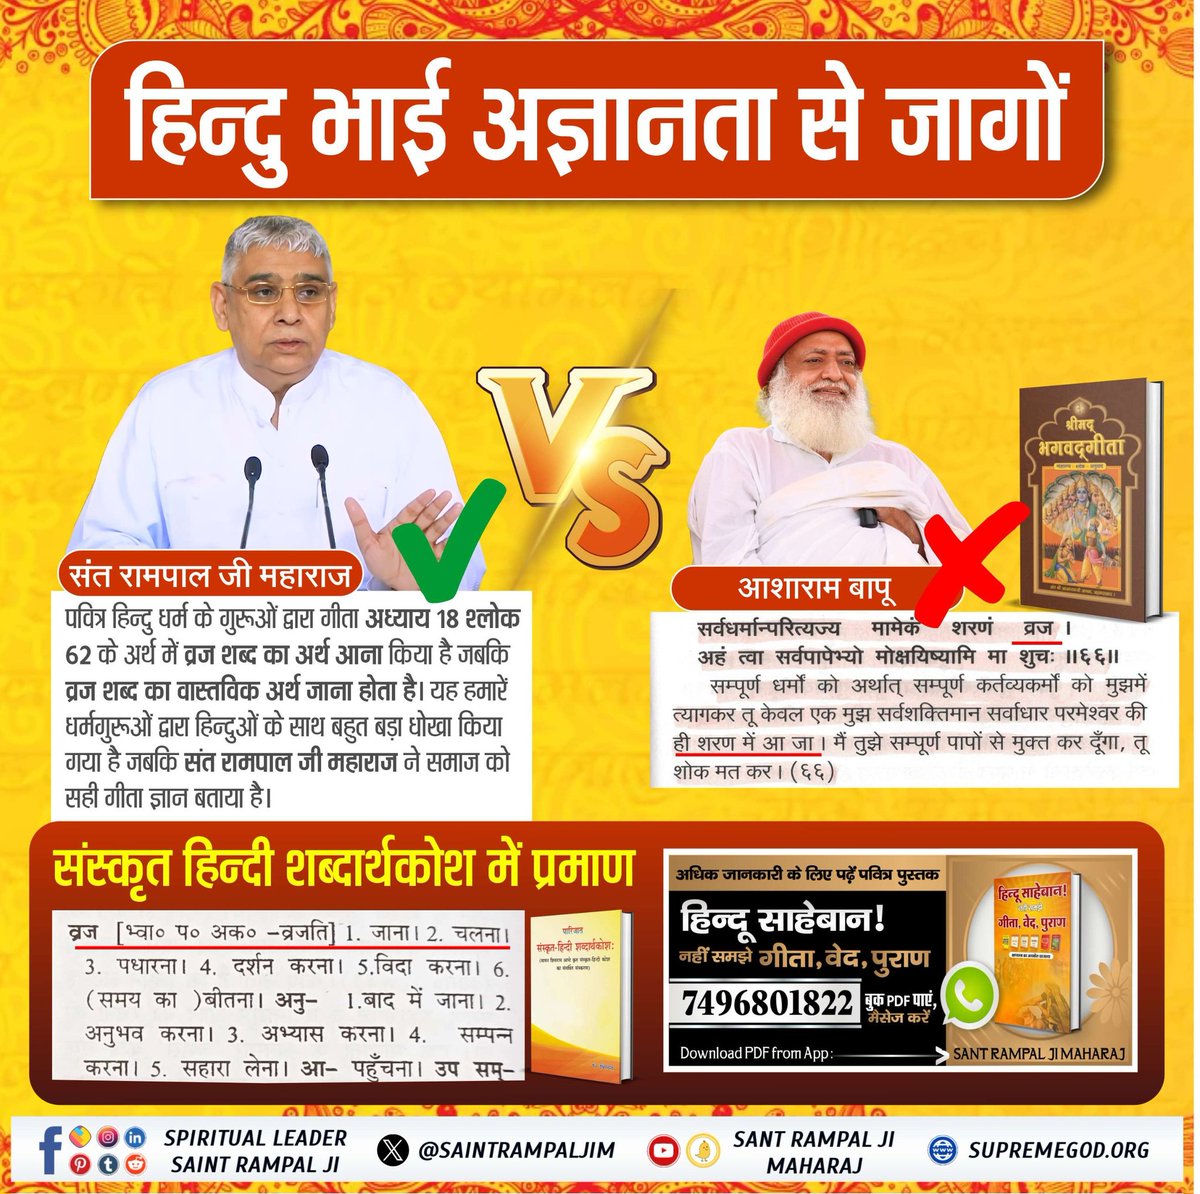 #हिन्दू_भाई_संभलो
Till today, we Hindus have been told that God is formless and cannot be seen. Whereas in Rigveda Mandal No. 9 Sukta 82 Mantra 1, it is clearly written that God is visible like a king and resides in the upper world.
Hindu Bhai Dhokhe Mein
#HinduismForLife